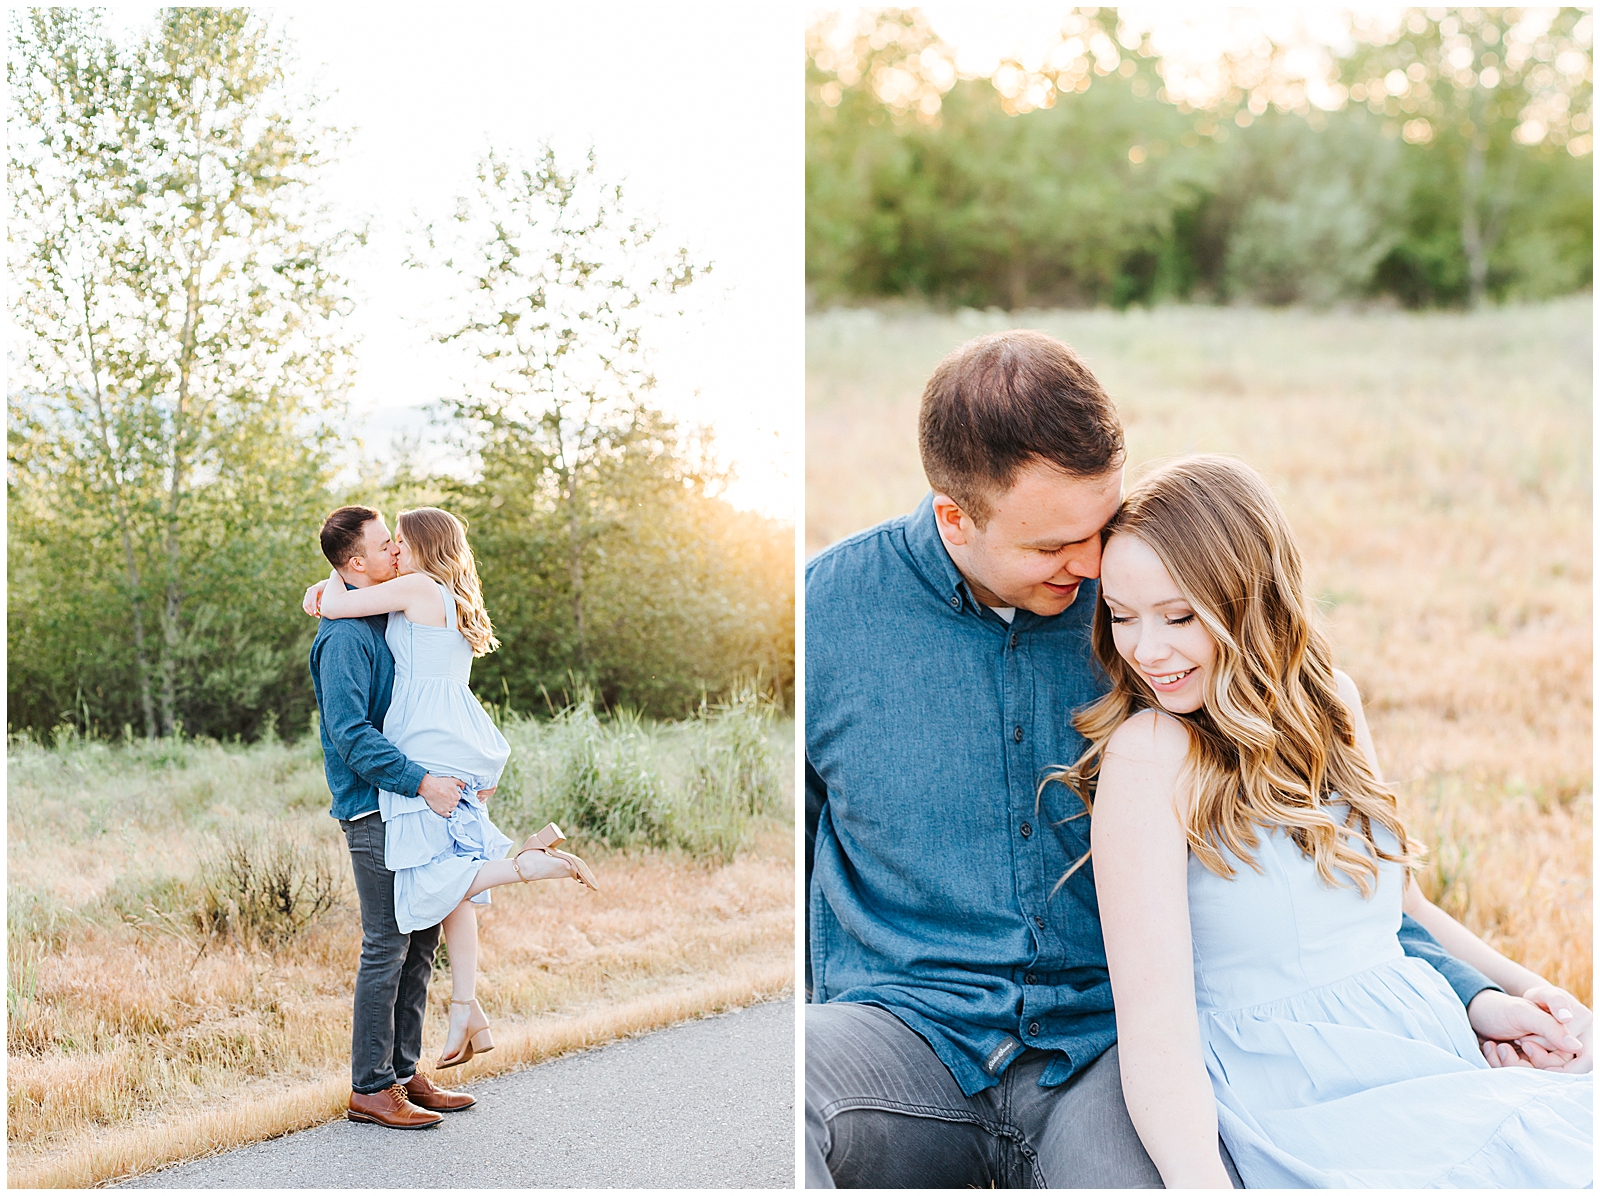 Spring Engagement Photos at Golden Hour in Boise Idaho